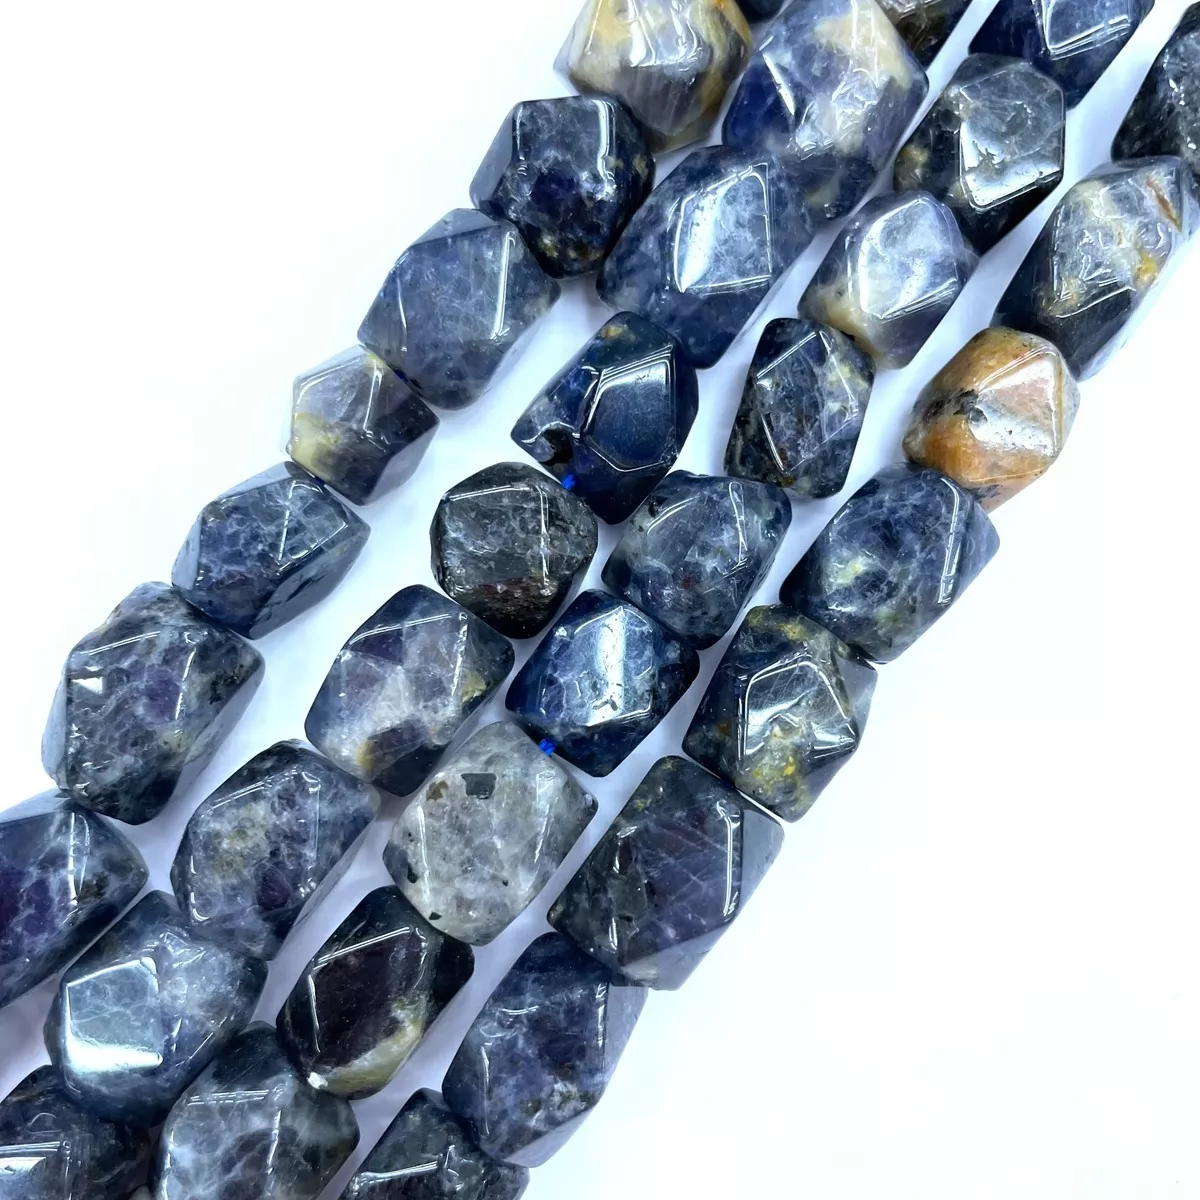 Lolite, Irregular Faceted Nuggets,10x14mm, Approx 380mm